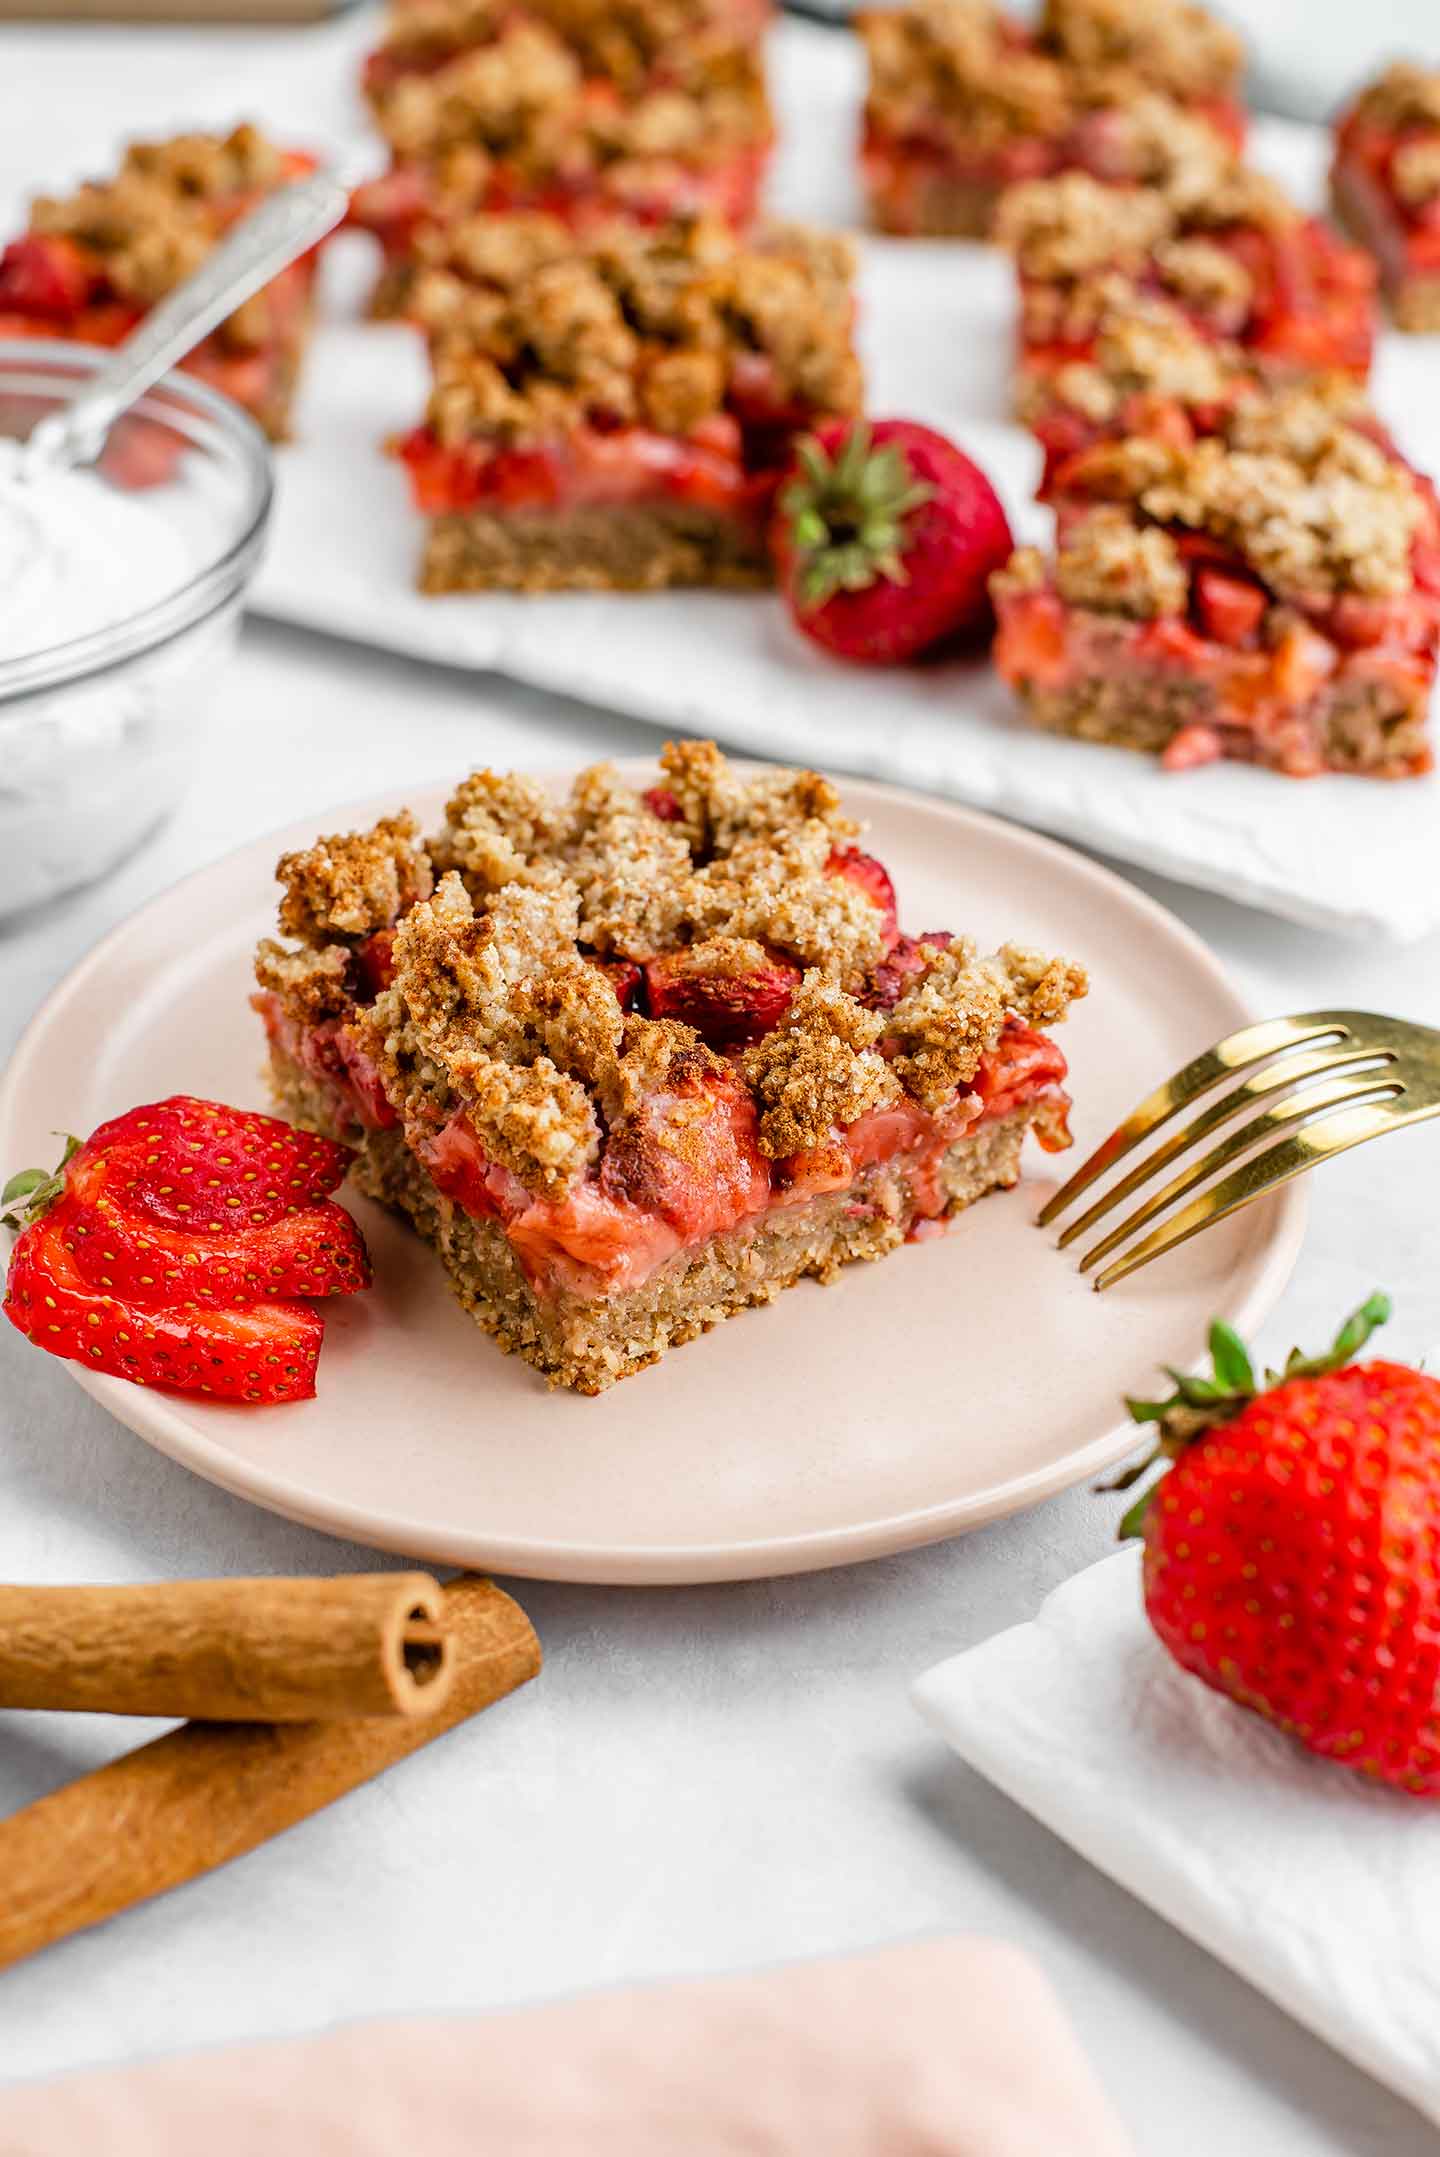 Side view of a strawberry crisp bar on a small plate. A tray of other bars is in the background. The crust is firm, the filling is gooey, and the topping is golden.